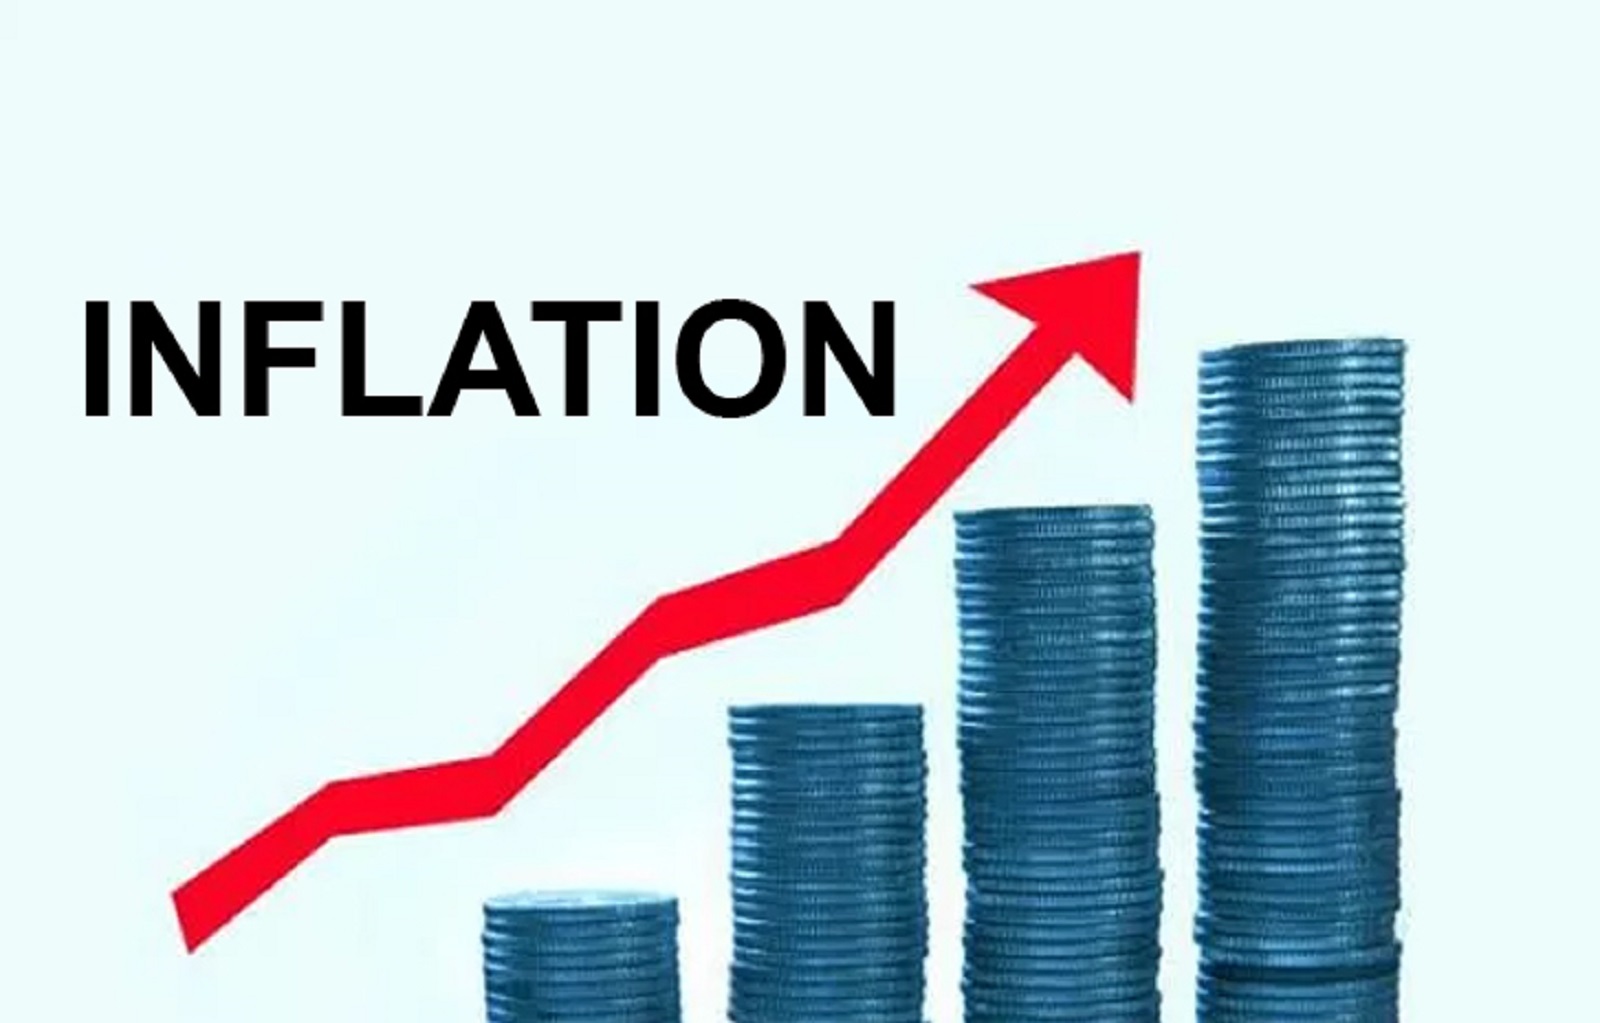 Inflation hits 3.5% in December